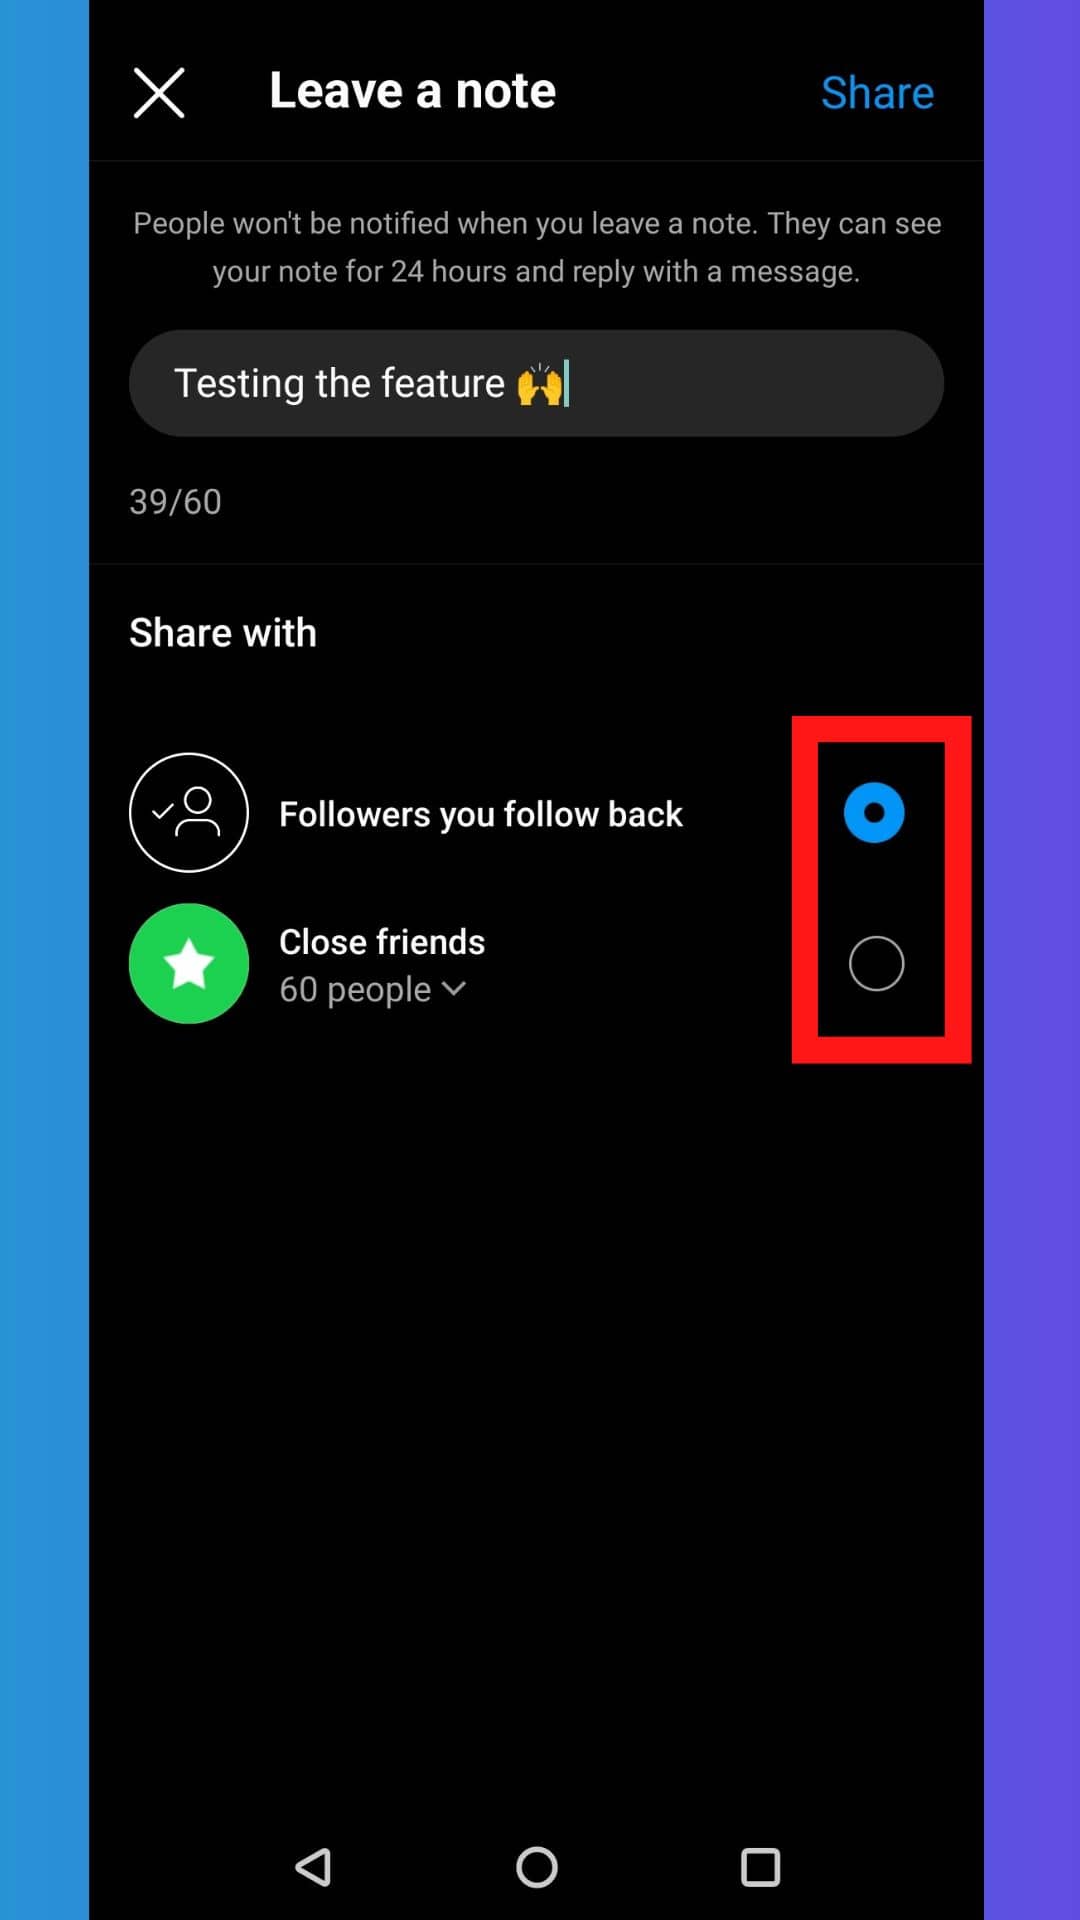 Tap the radio button next to choose from two options that say Followers you follow back or Close friends